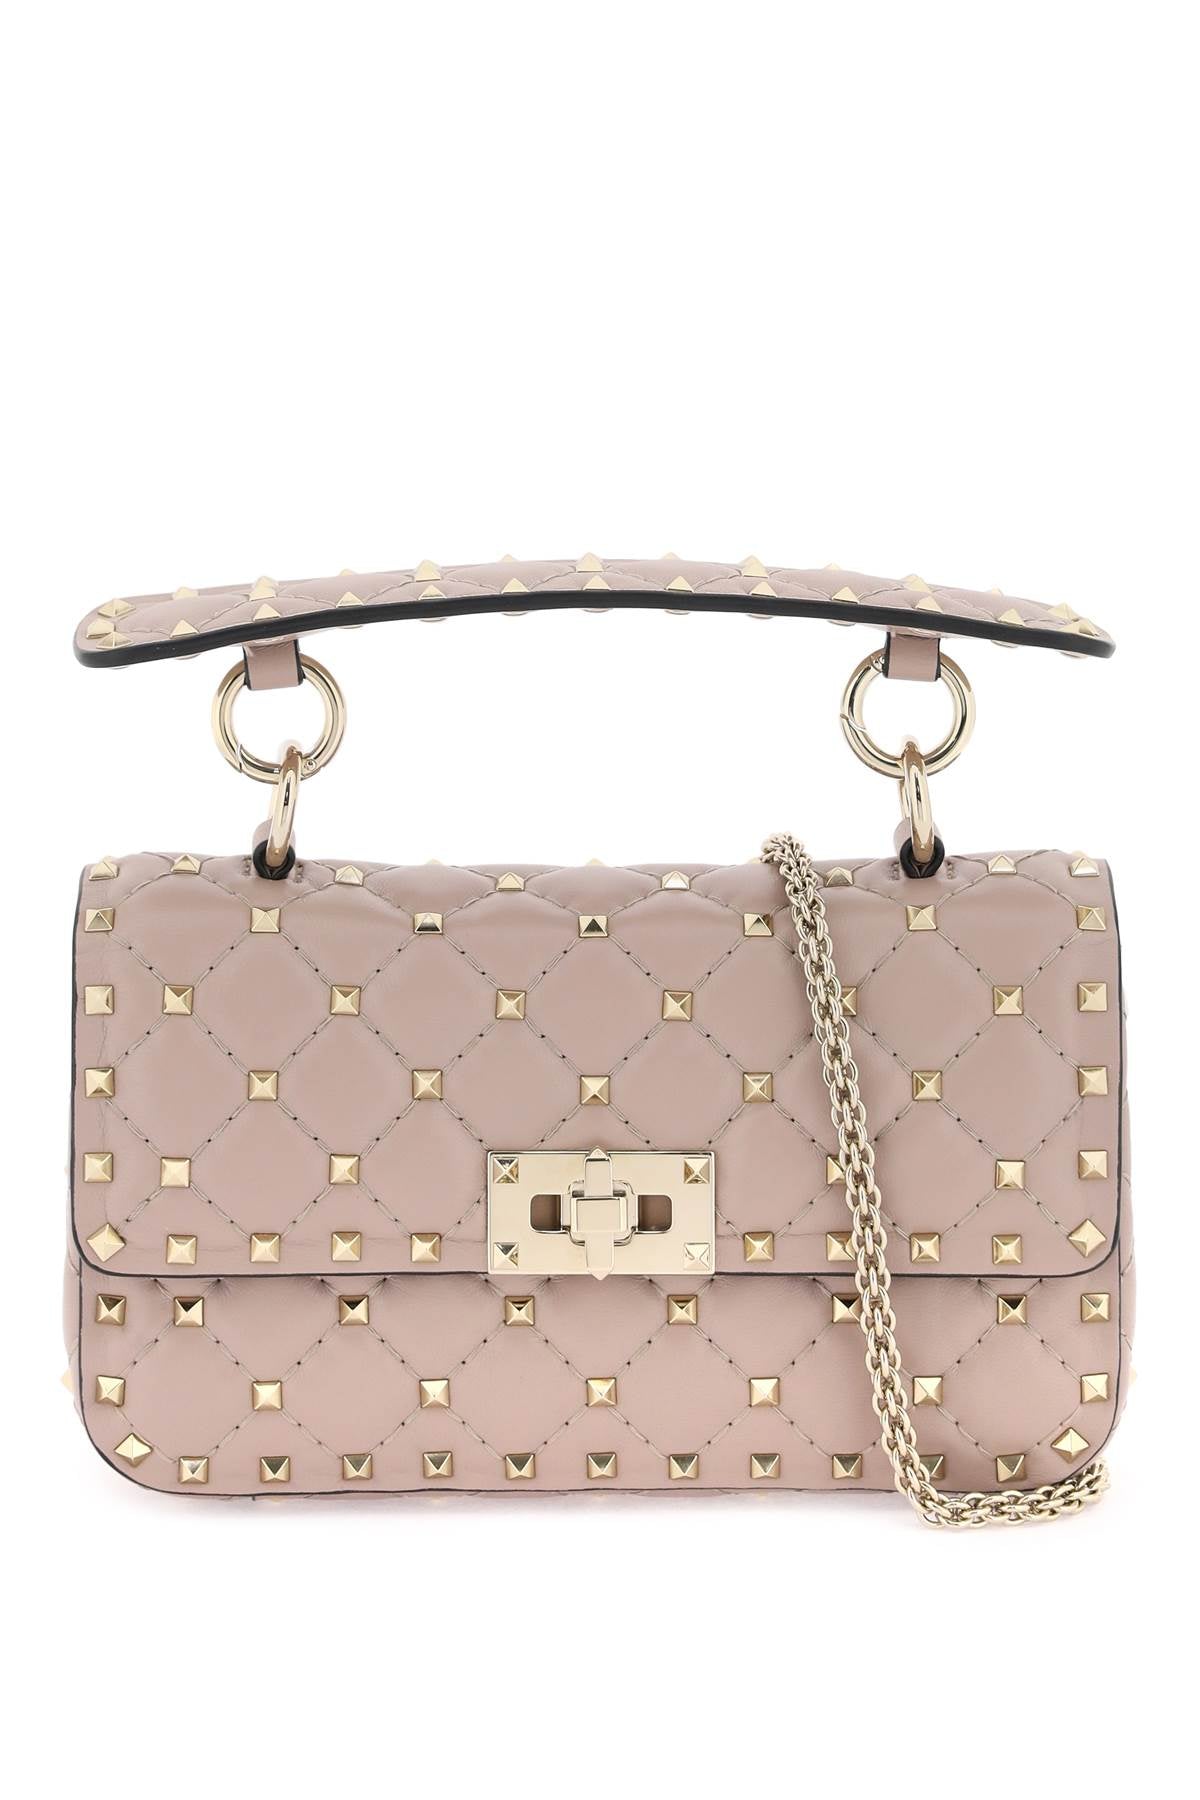 VALENTINO Pink Lambskin Leather Mini Shoulder Crossbody Bag with Rockstud Detailing for Women